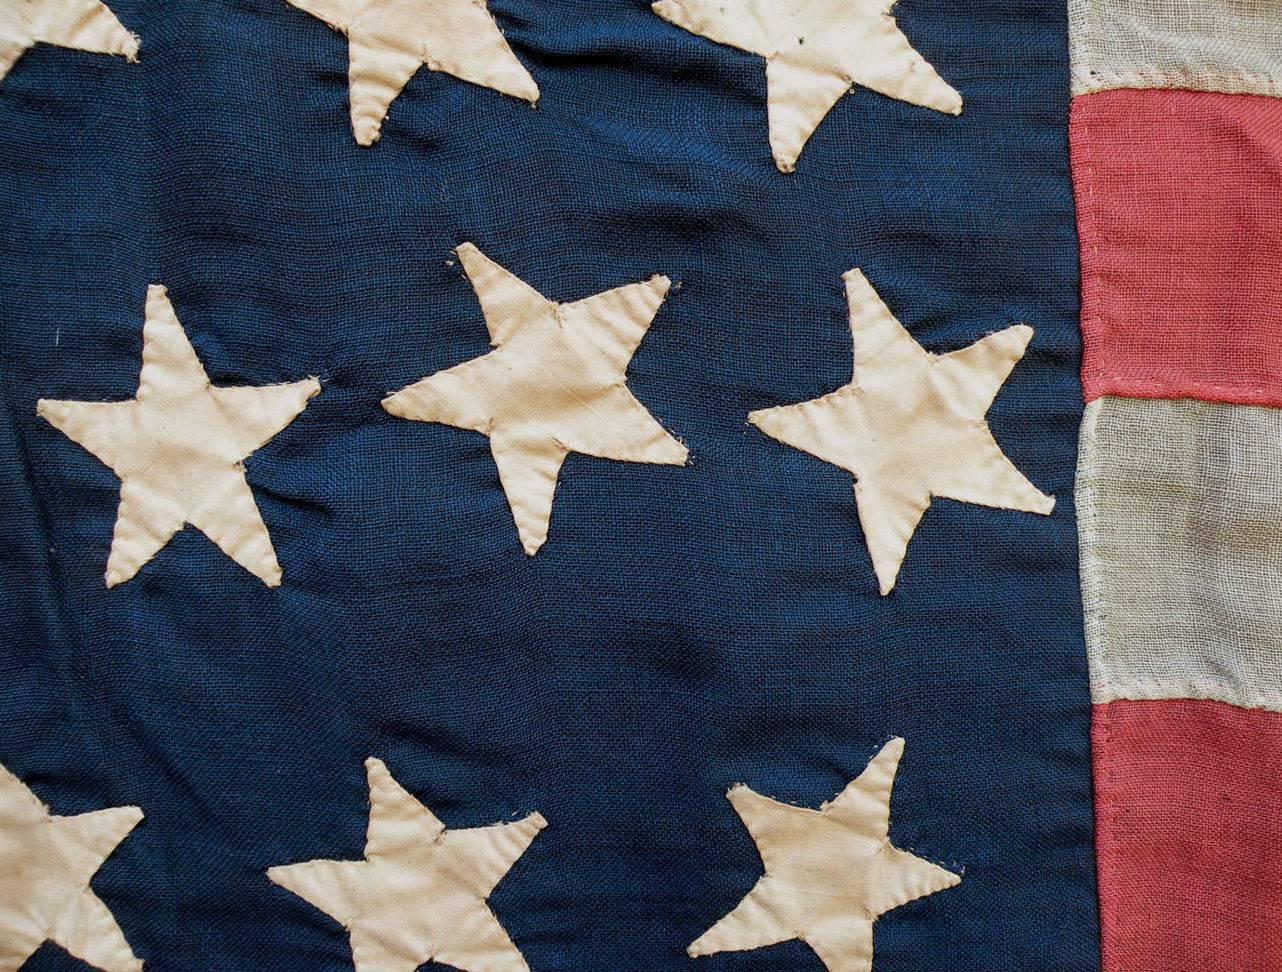 This is a striking hand-cut and hand-sewn 38-star American flag. The 38th star was added to the flag to commemorate Colorado statehood. Since it was admitted to the Union in 1886, Colorado earned the nickname the 